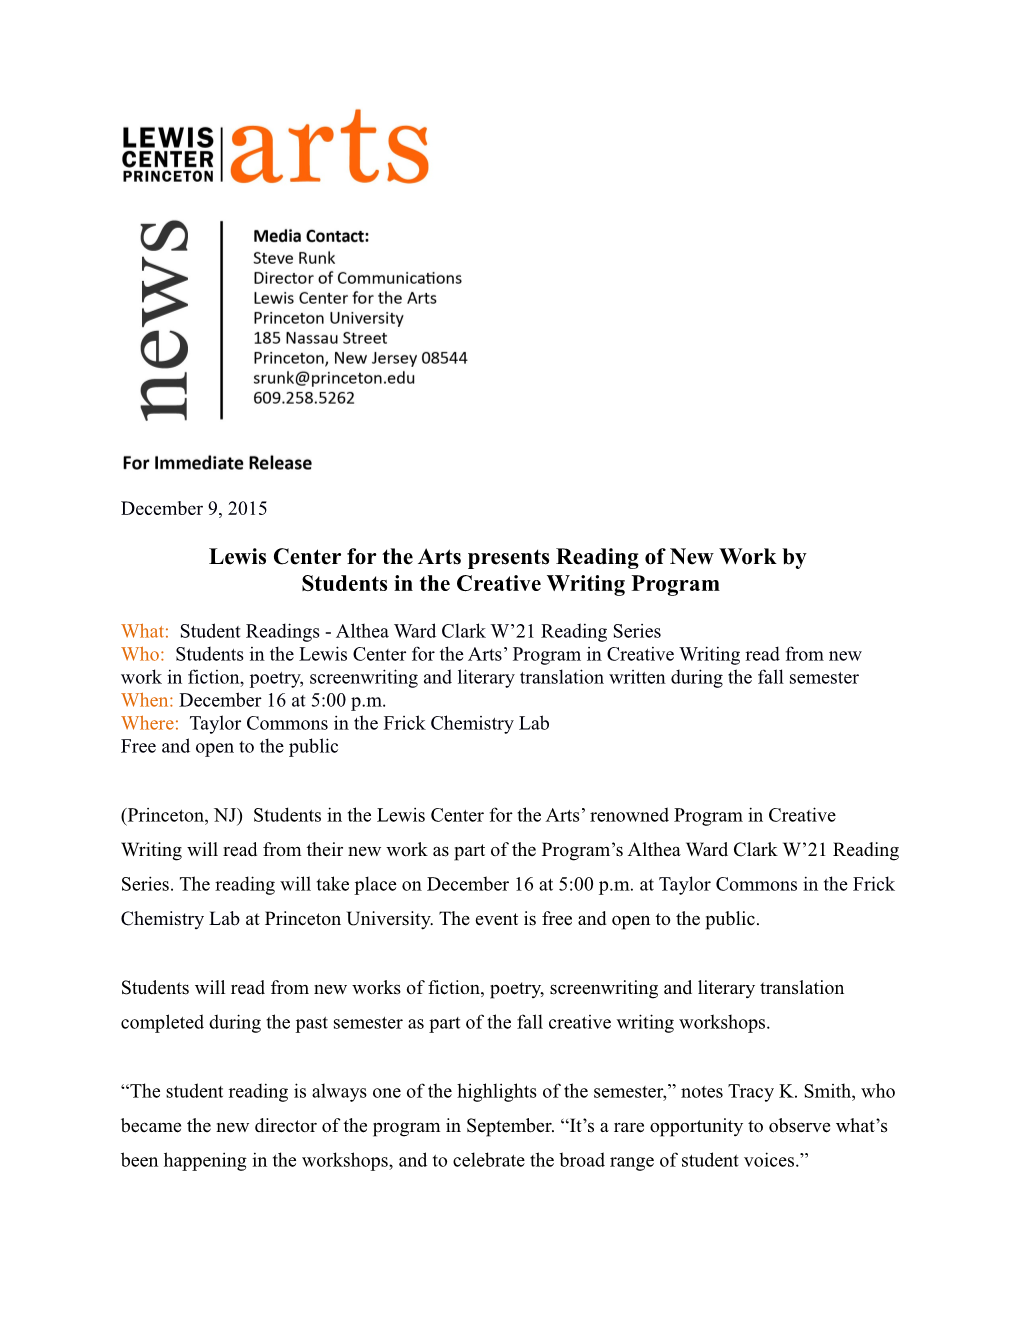 Lewis Center for the Arts Presents Reading of New Work By